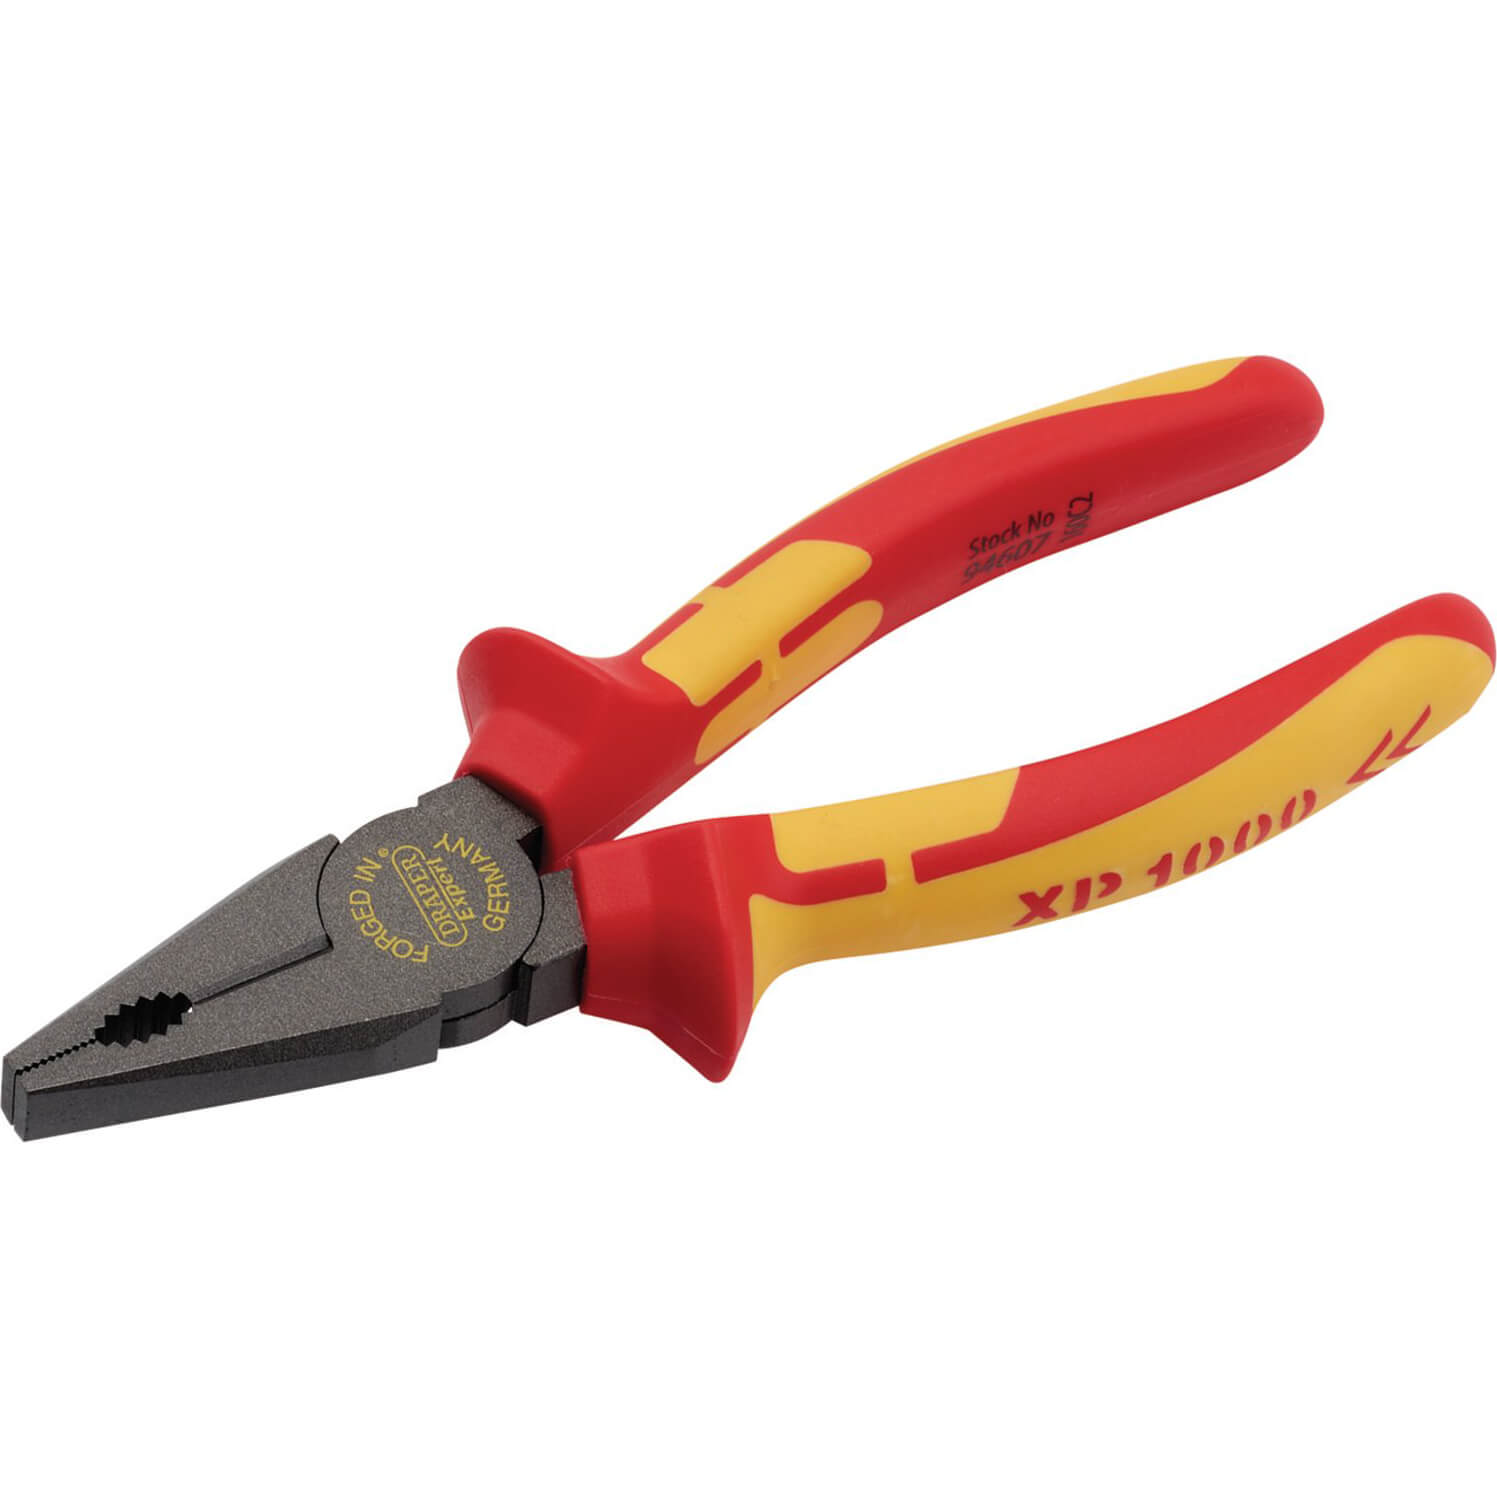 Image of Draper XP1000 VDE Insulated Combination Pliers 160mm